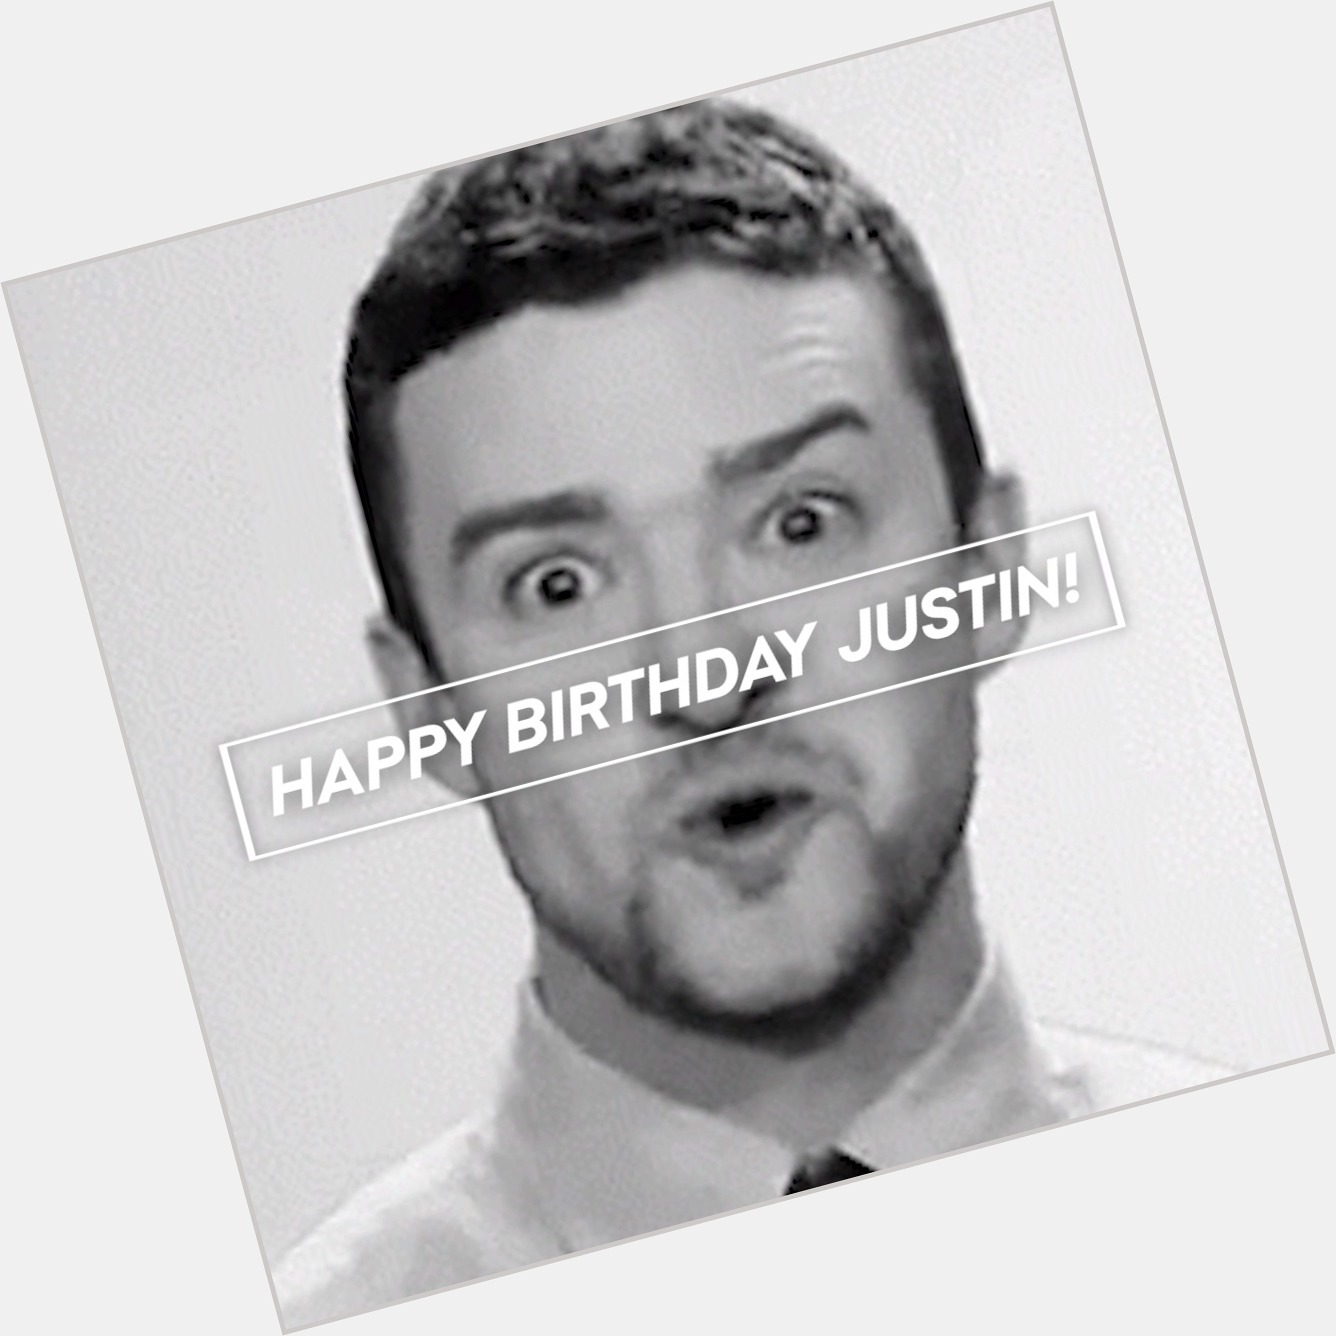 Happy Birthday Which song are you jamming to today?  : Justin Timberlake 